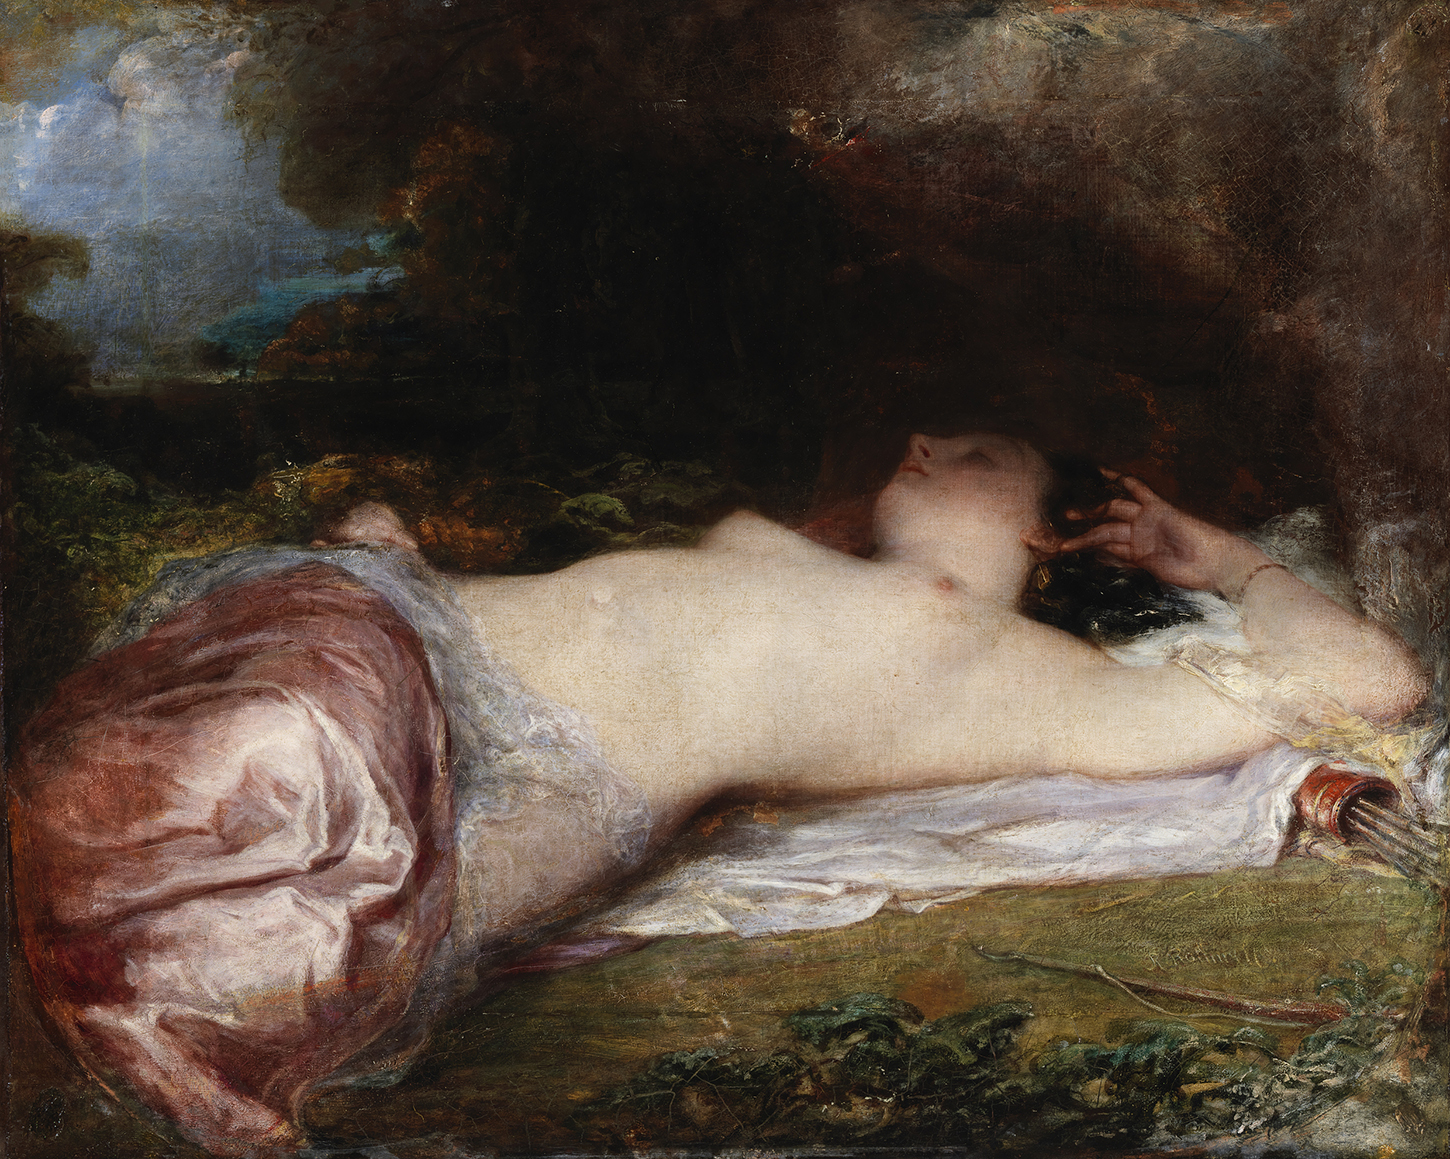 An oil painting of a female figure reclining on grass. Her arm is stretched behind her head, and she is half-covered by silken fabric. Under her, a sheaf of arrows.